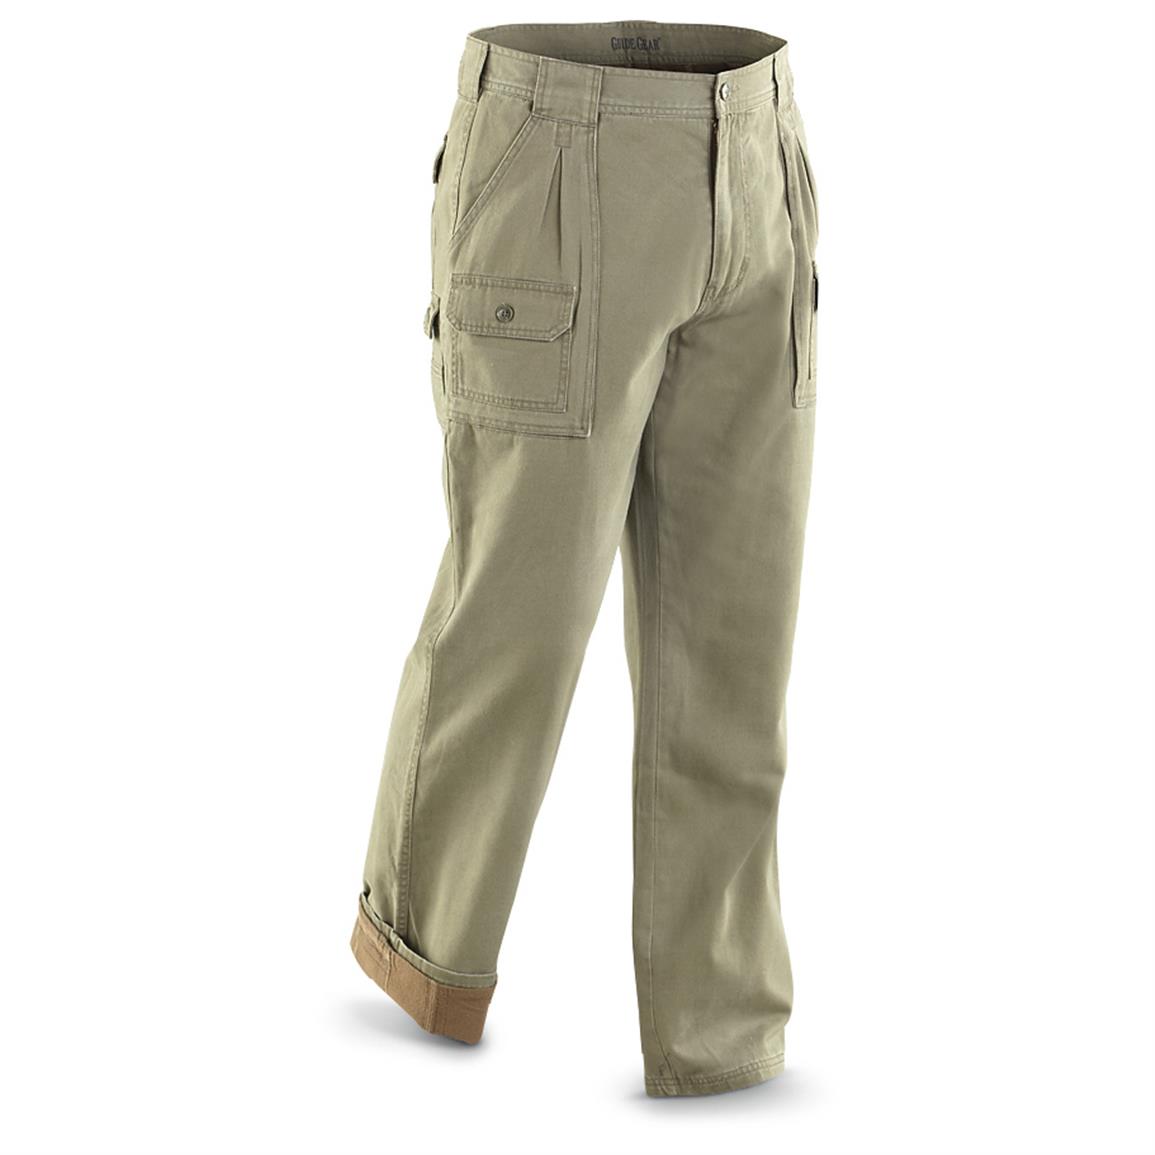 Guide Gear Flannel-lined Hiking / Trekking Pants - 593684, Insulated ...